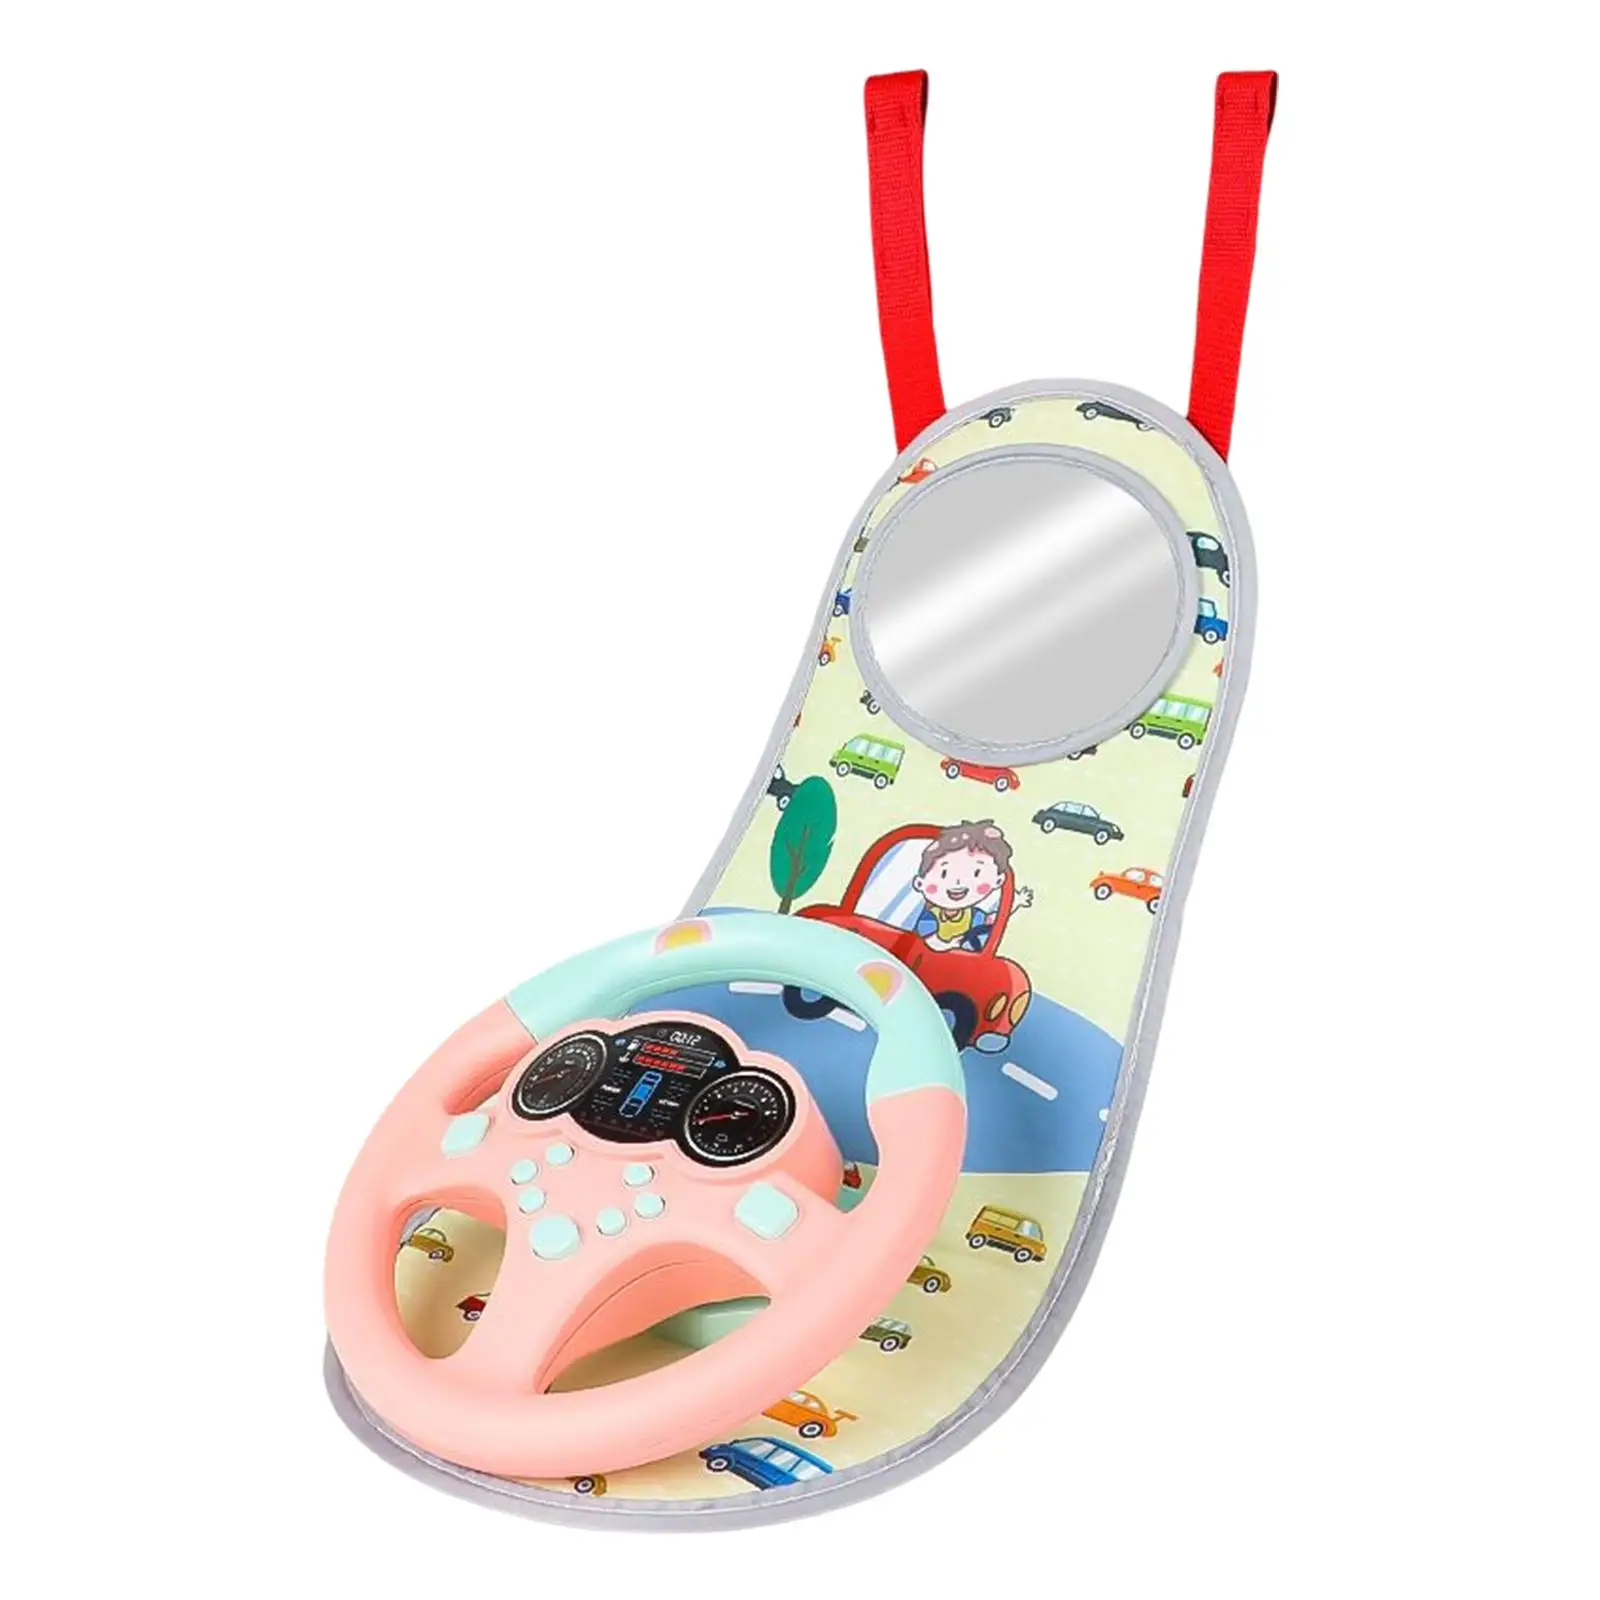 Multifunctional Car Seat Driving Game Play Center Toy for Toddlers Gifts